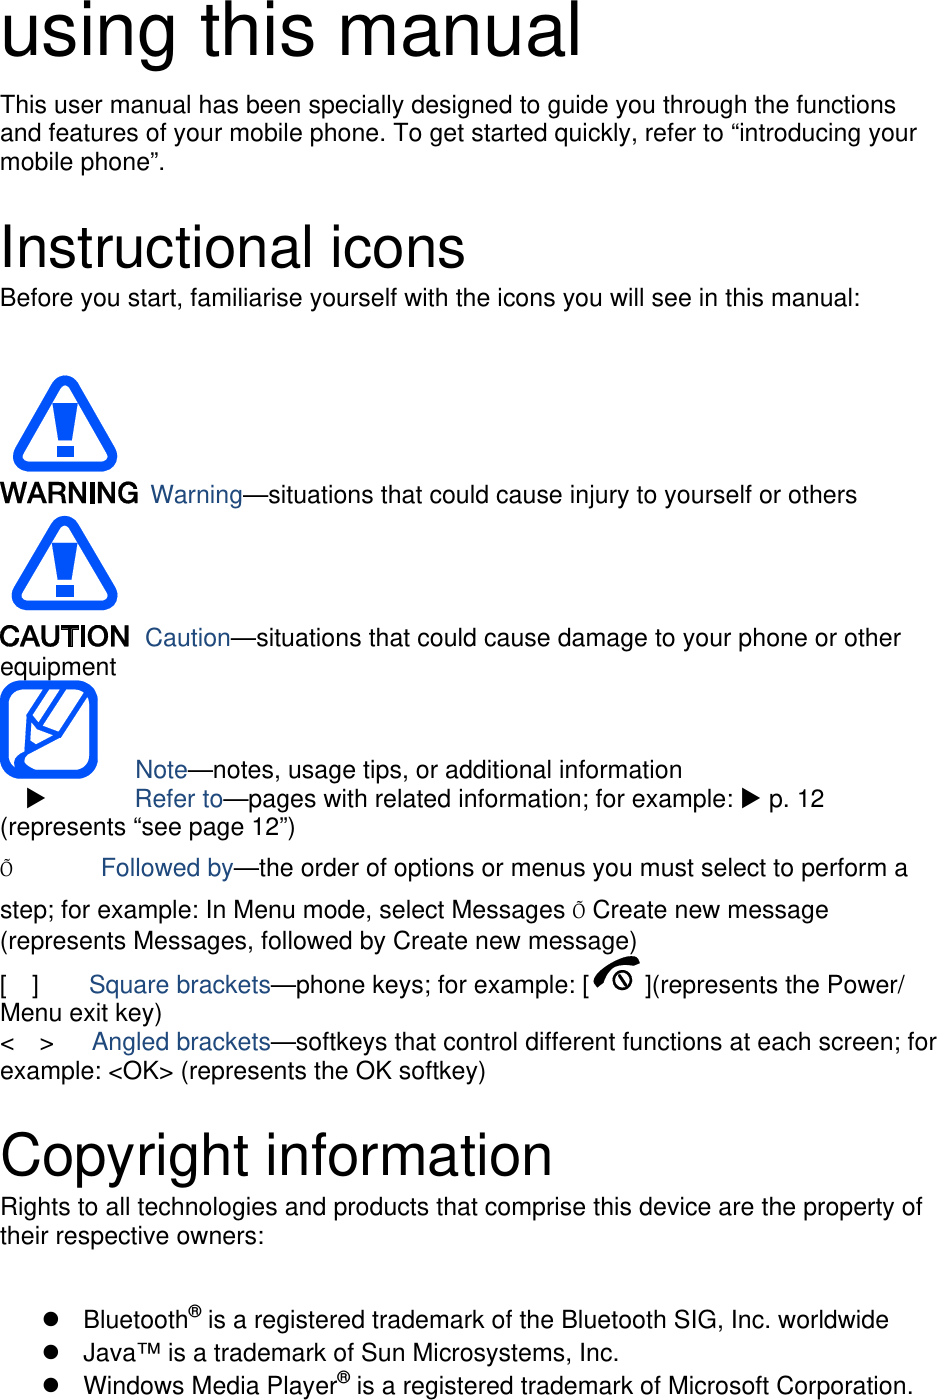 using this manual This user manual has been specially designed to guide you through the functions and features of your mobile phone. To get started quickly, refer to “introducing your mobile phone”.  Instructional icons Before you start, familiarise yourself with the icons you will see in this manual:     Warning—situations that could cause injury to yourself or others  Caution—situations that could cause damage to your phone or other equipment    Note—notes, usage tips, or additional information          Refer to—pages with related information; for example:  p. 12 (represents “see page 12”) Õ       Followed by—the order of options or menus you must select to perform a step; for example: In Menu mode, select Messages Õ Create new message (represents Messages, followed by Create new message) [  ]    Square brackets—phone keys; for example: [ ](represents the Power/ Menu exit key) &lt;  &gt;   Angled brackets—softkeys that control different functions at each screen; for example: &lt;OK&gt; (represents the OK softkey)  Copyright information Rights to all technologies and products that comprise this device are the property of their respective owners:   Bluetooth® is a registered trademark of the Bluetooth SIG, Inc. worldwide   Java™ is a trademark of Sun Microsystems, Inc.  Windows Media Player® is a registered trademark of Microsoft Corporation. 